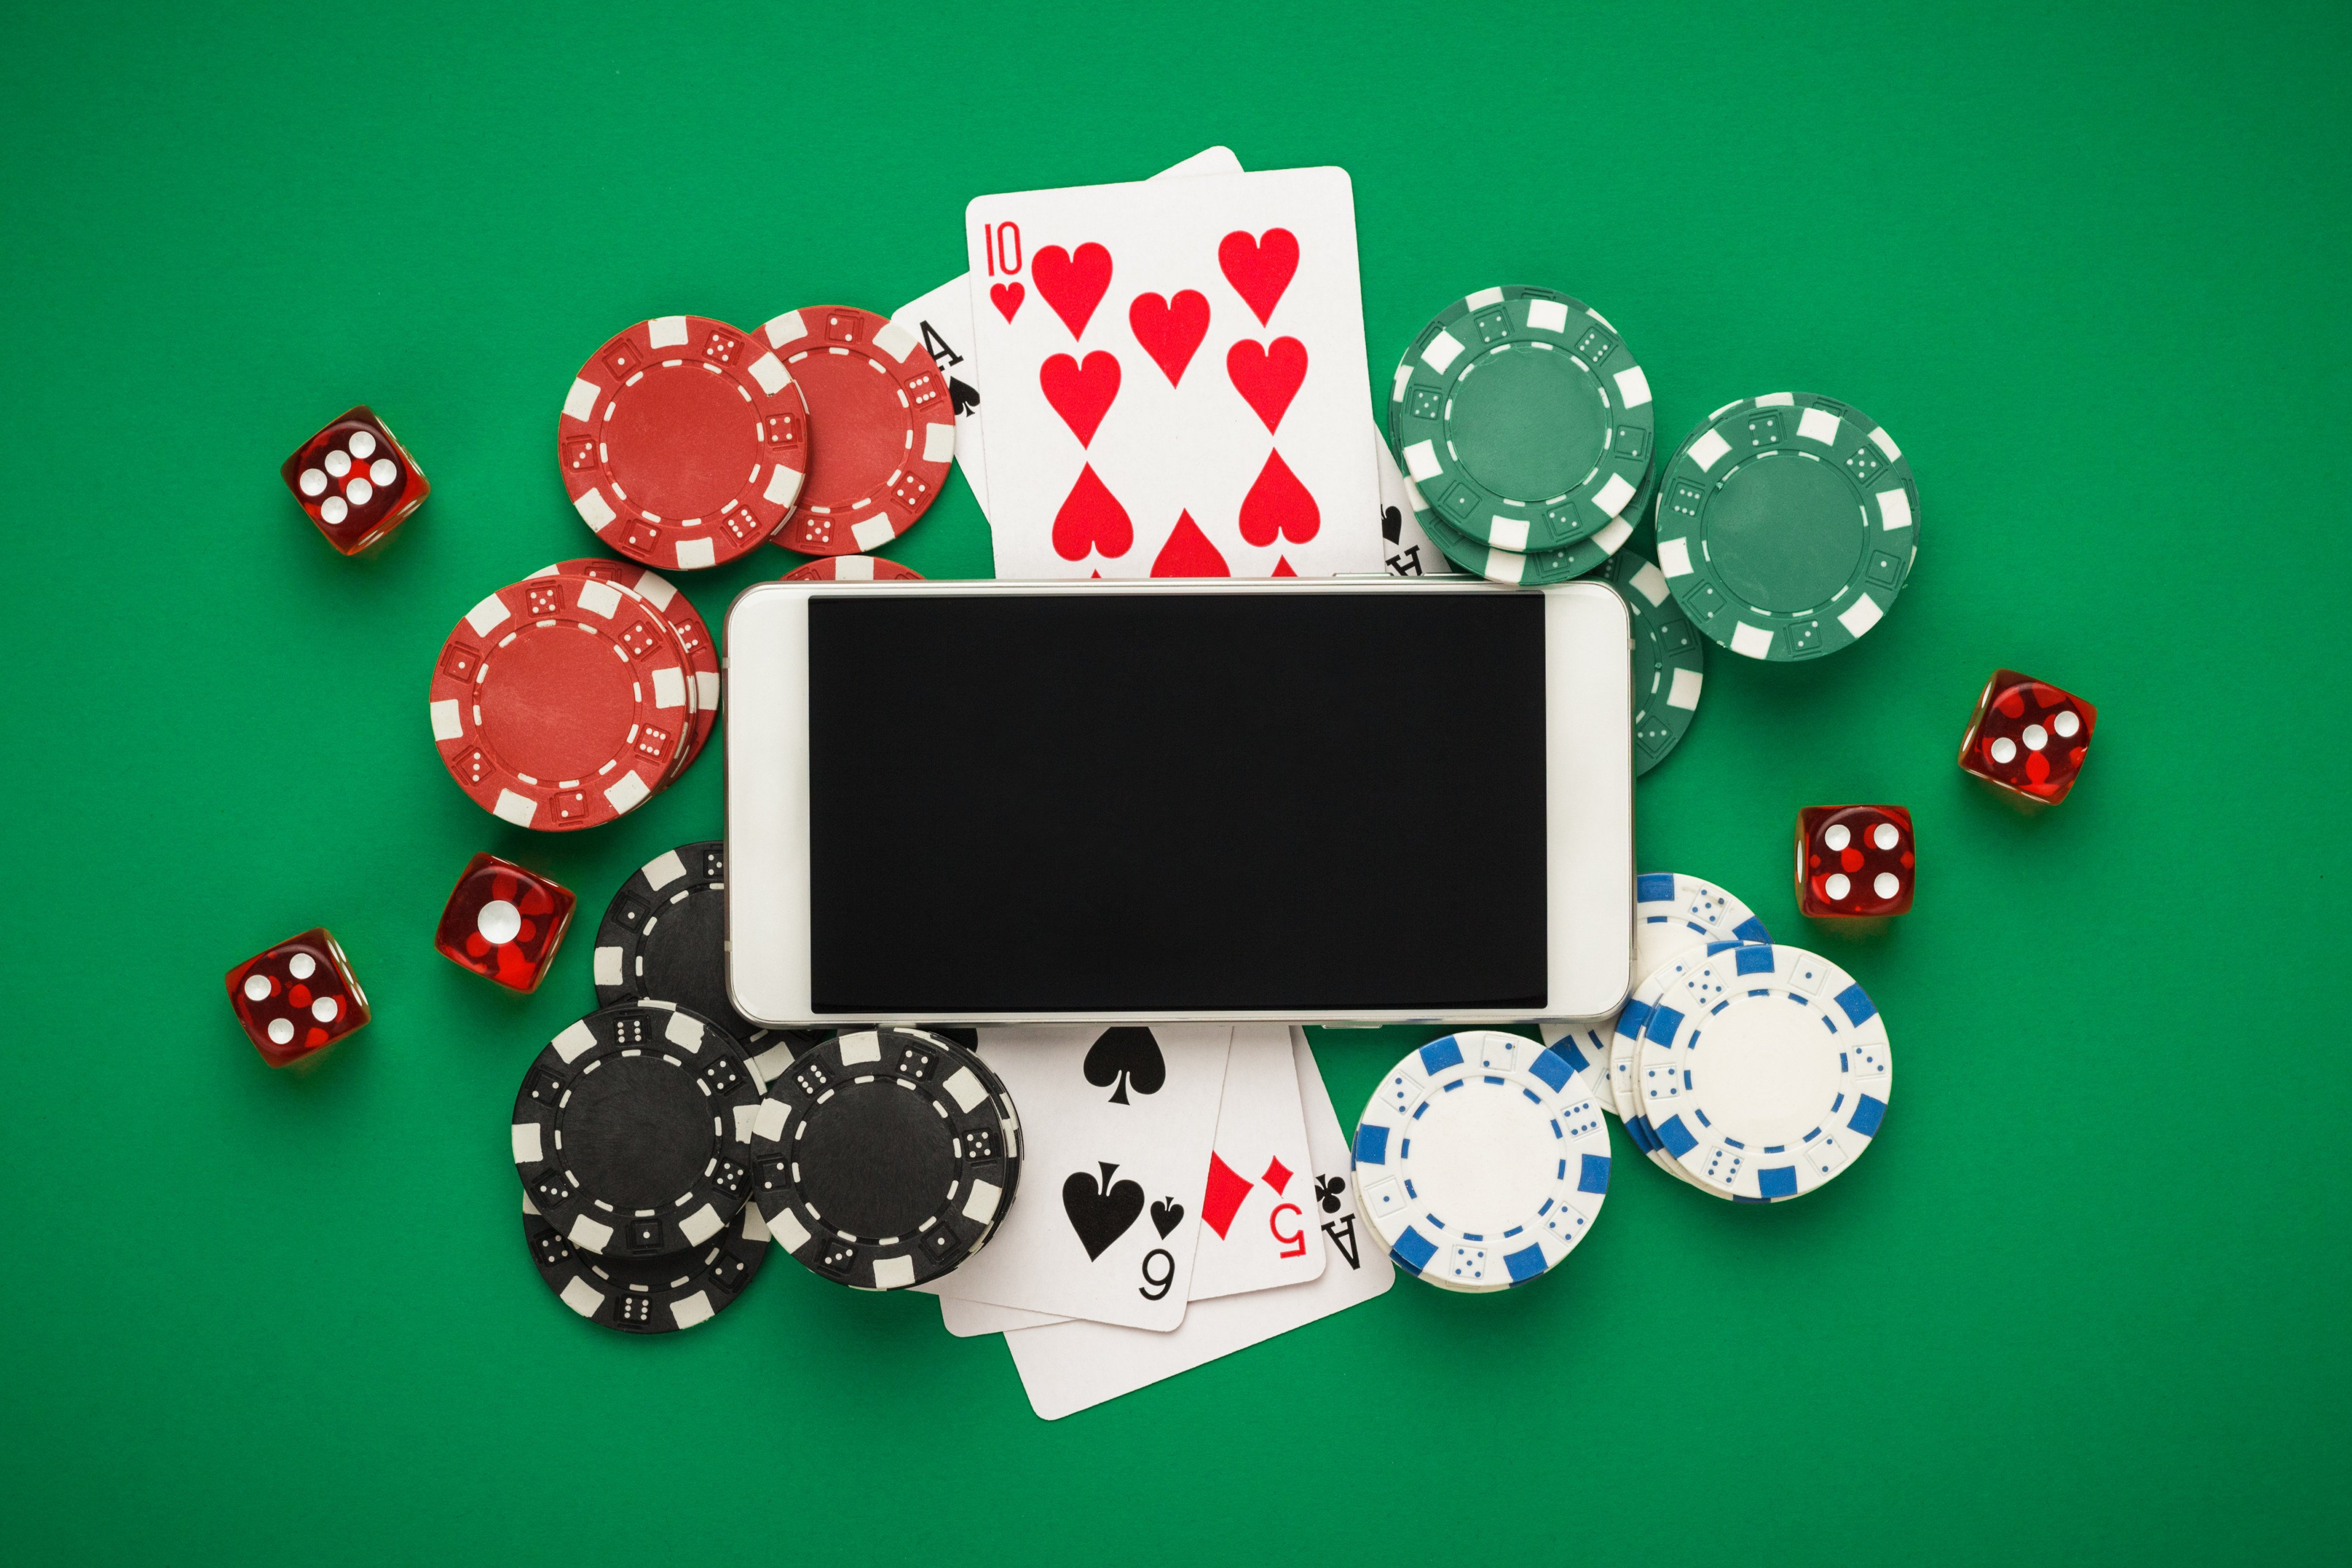 Hong Kong’s Consumer Council is calling for tighter regulatoin on Smartphone gambling apps. Photo: Shutterstock